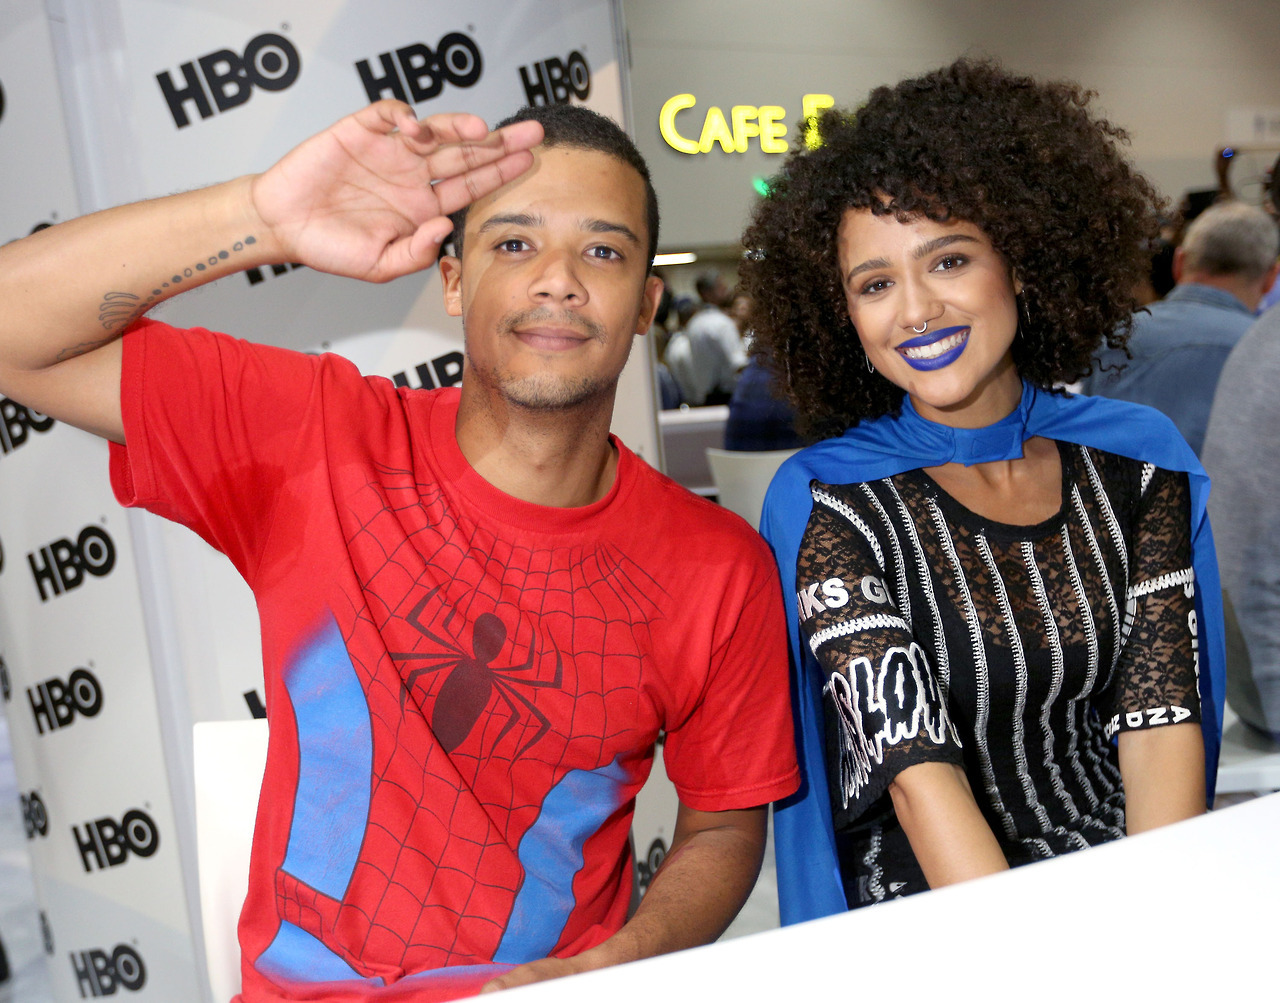 celebsofcolor:Jacob Anderson and Nathalie Emmanuel at the “Game of Thrones” autograph